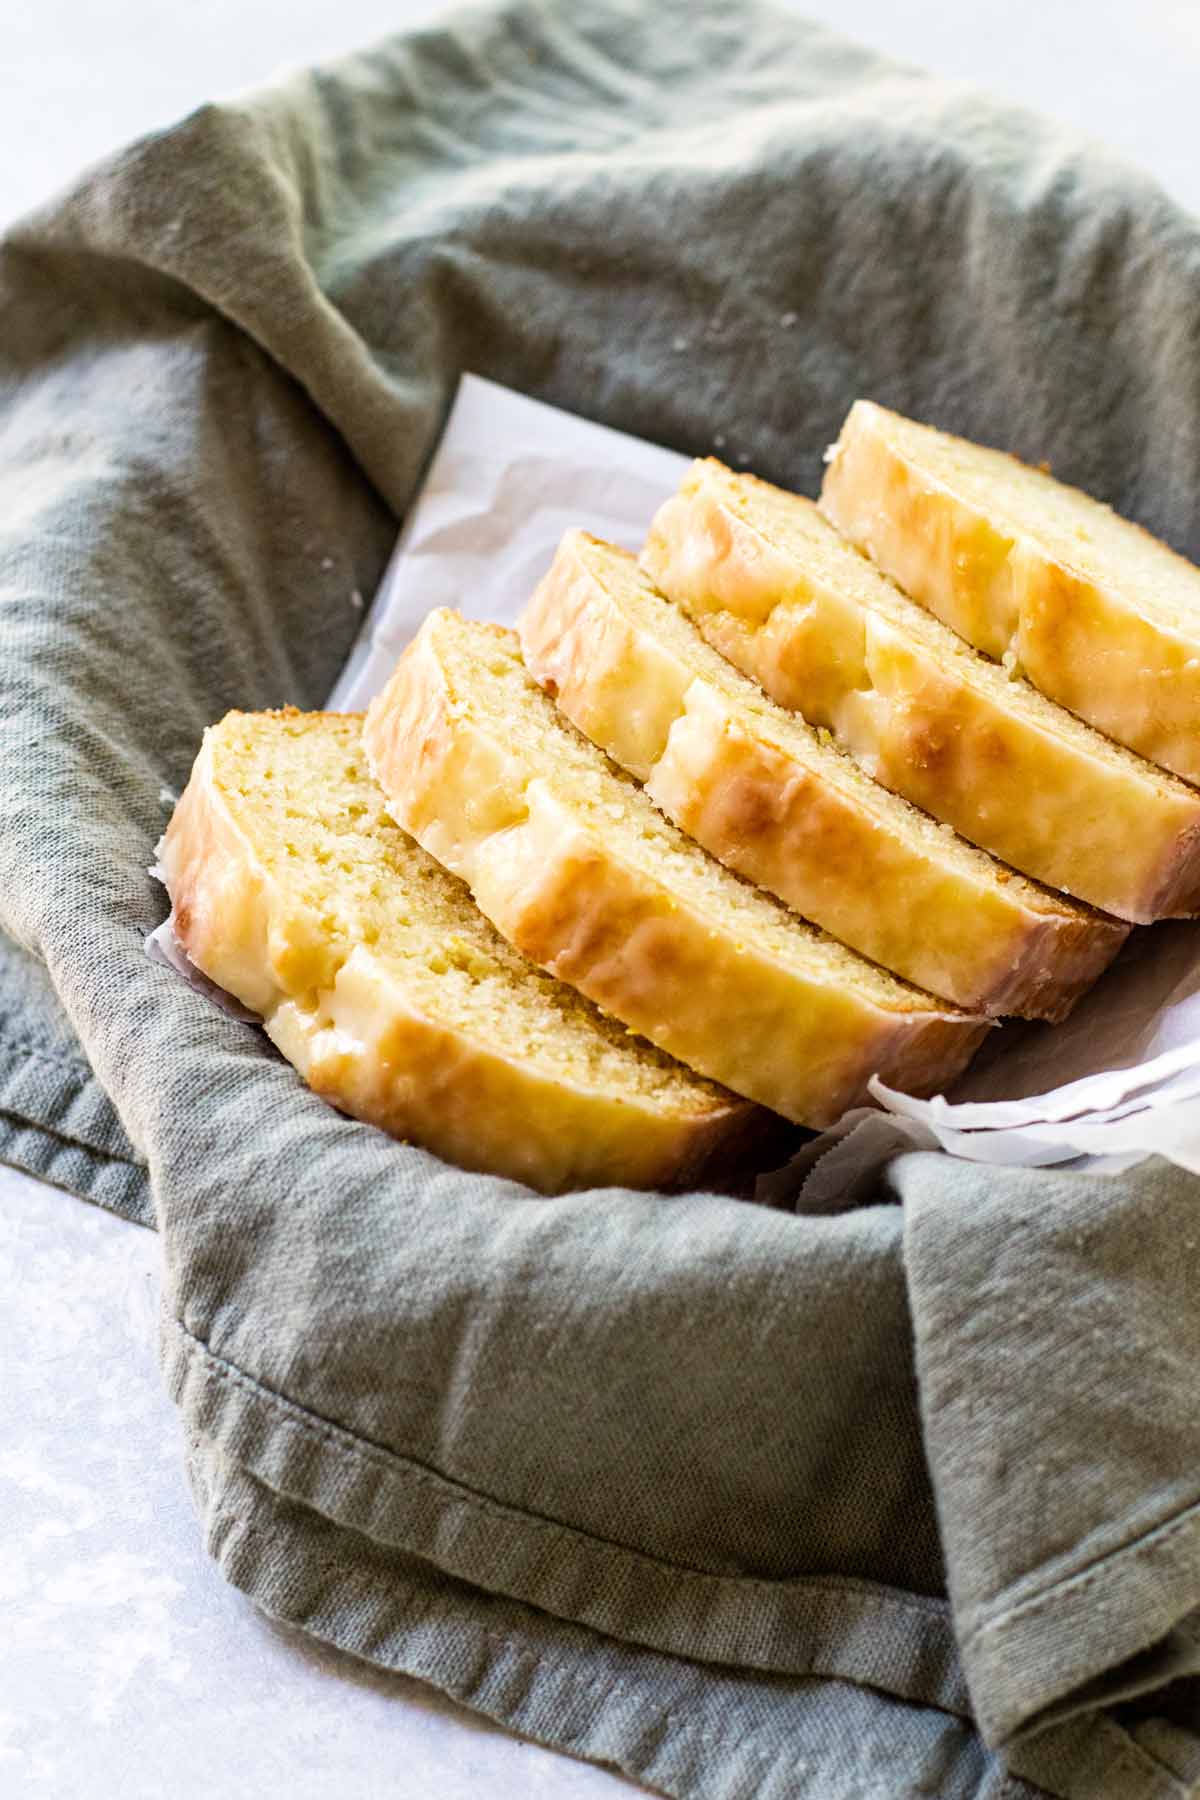 photo of slices of lemon bread in a dish lined with a tea towel